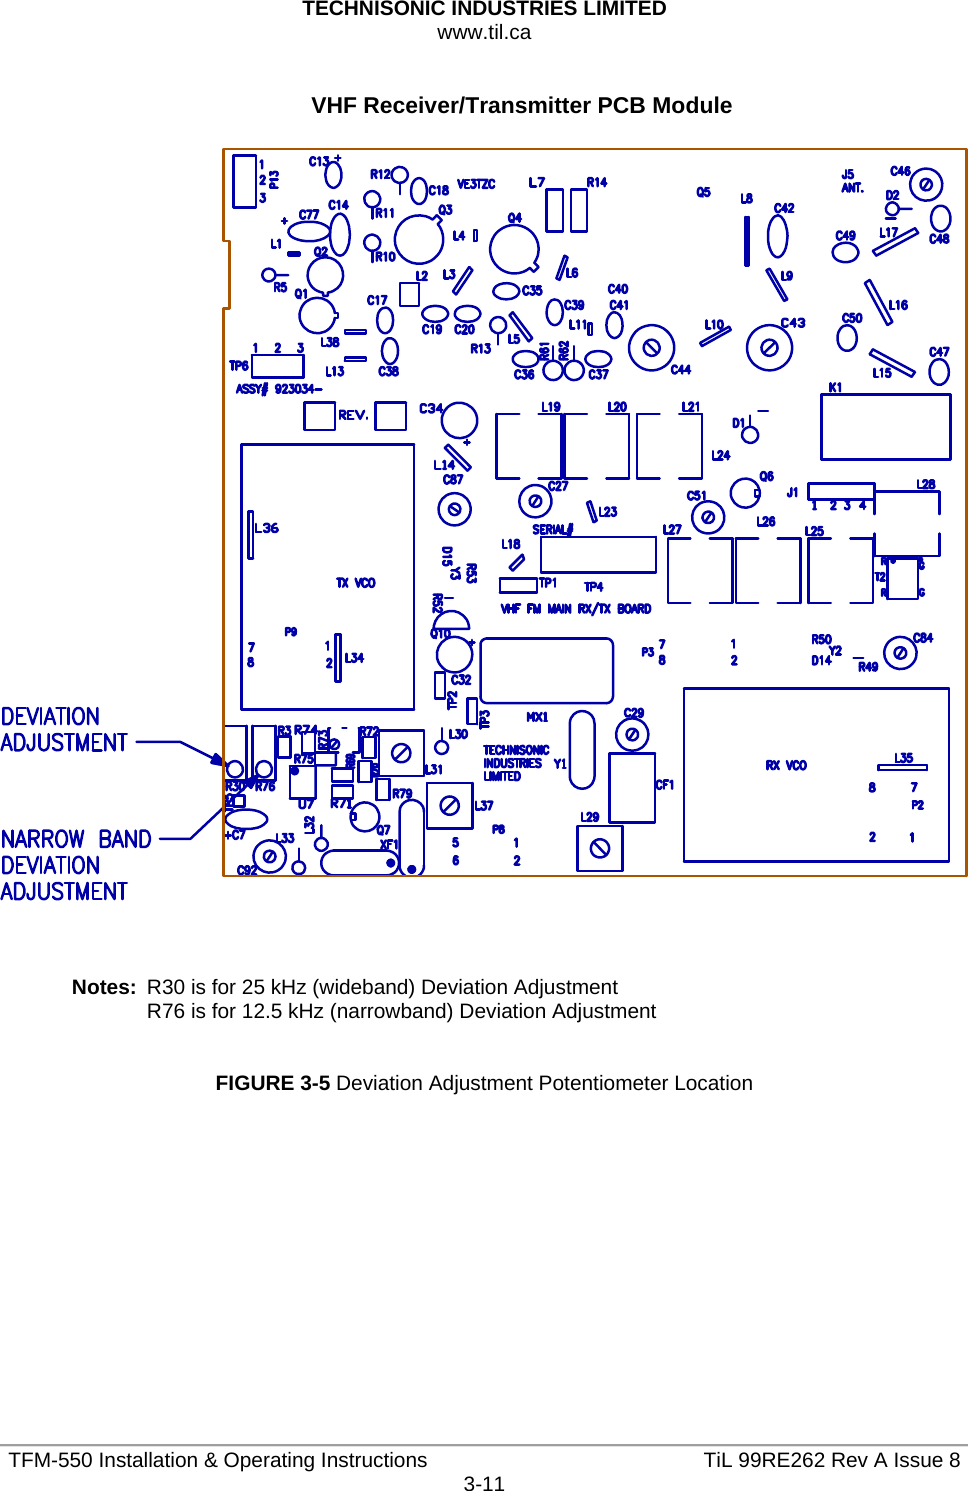 TECHNISONIC INDUSTRIES LIMITED www.til.ca   TFM-550 Installation &amp; Operating Instructions  TiL 99RE262 Rev A Issue 83-11  VHF Receiver/Transmitter PCB Module      Notes:  R30 is for 25 kHz (wideband) Deviation Adjustment R76 is for 12.5 kHz (narrowband) Deviation Adjustment   FIGURE 3-5 Deviation Adjustment Potentiometer Location            